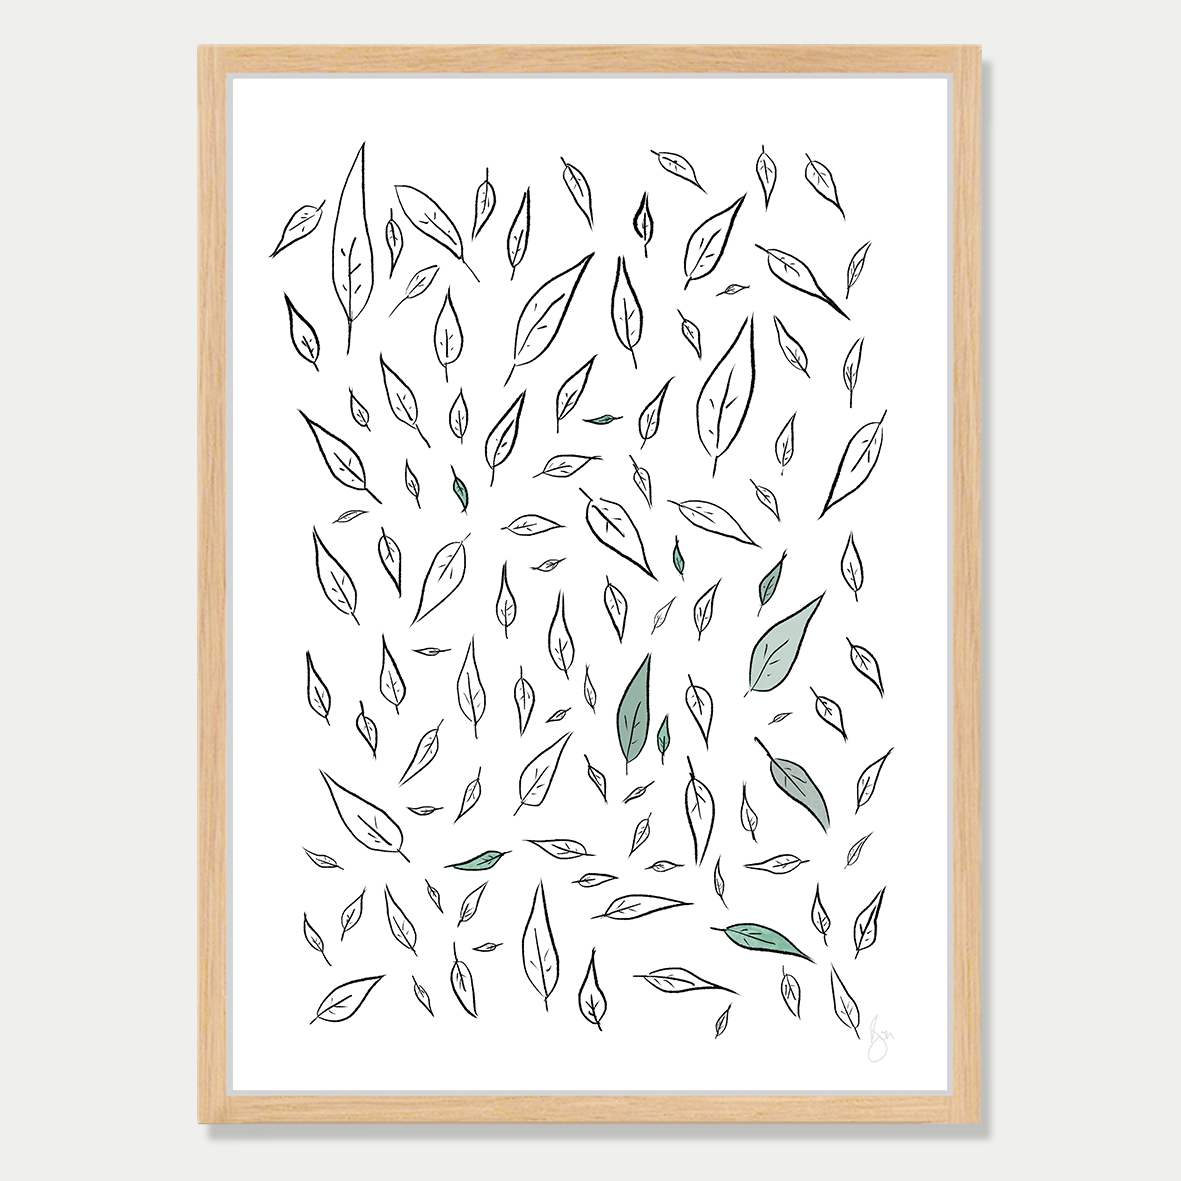 This art print is a playful minimal illustration of leaves, by Bon Jung. Printed in New Zealand by endemicworld and framed in raw oak.